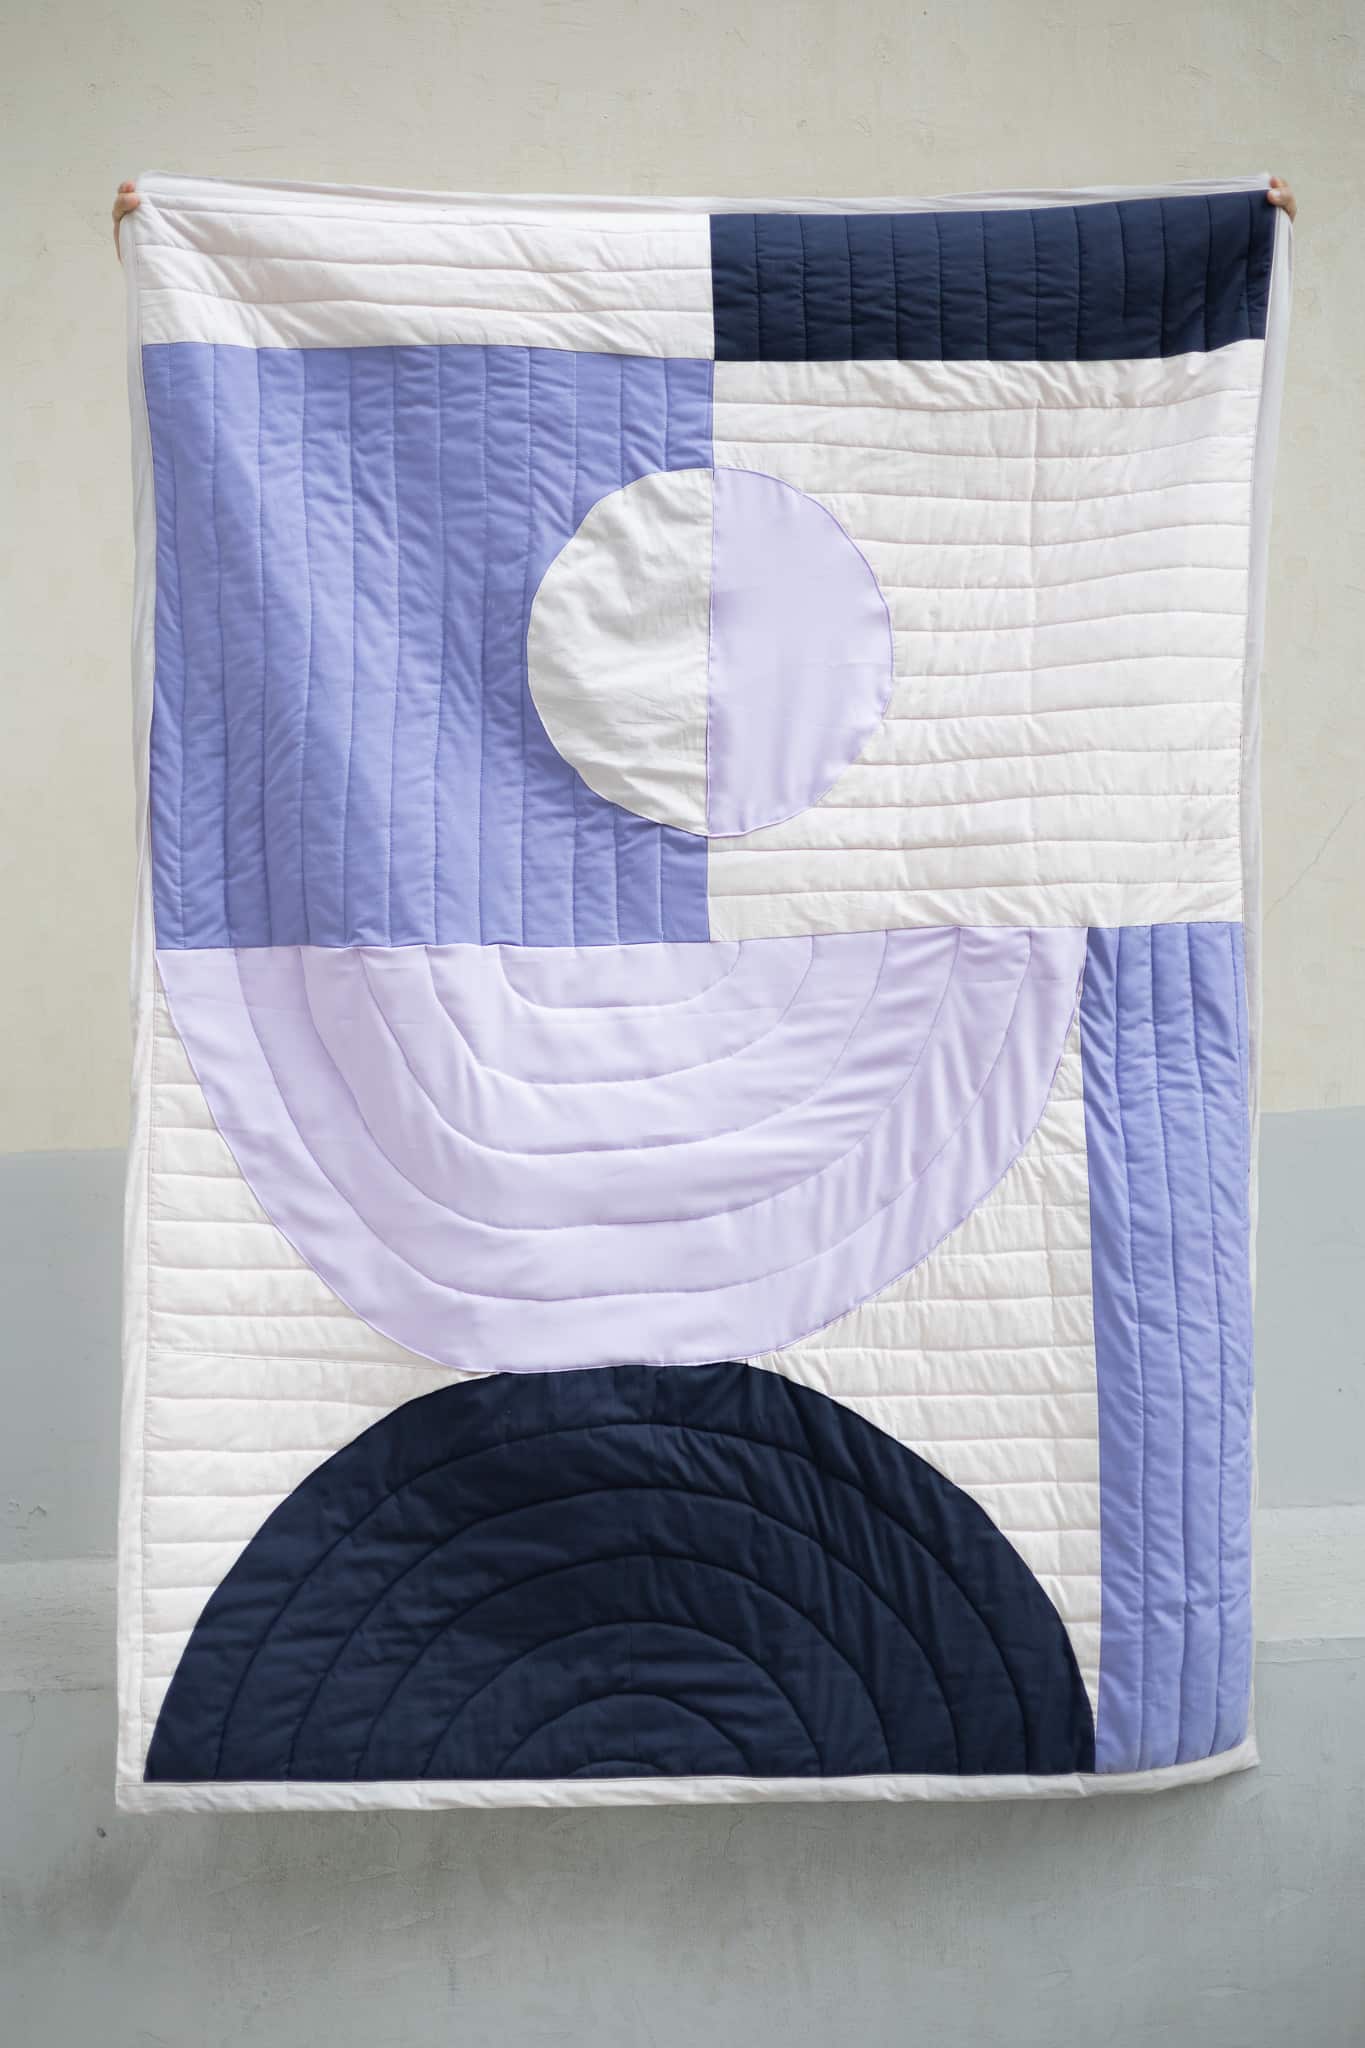 DIY Quilted wall hanging free pattern